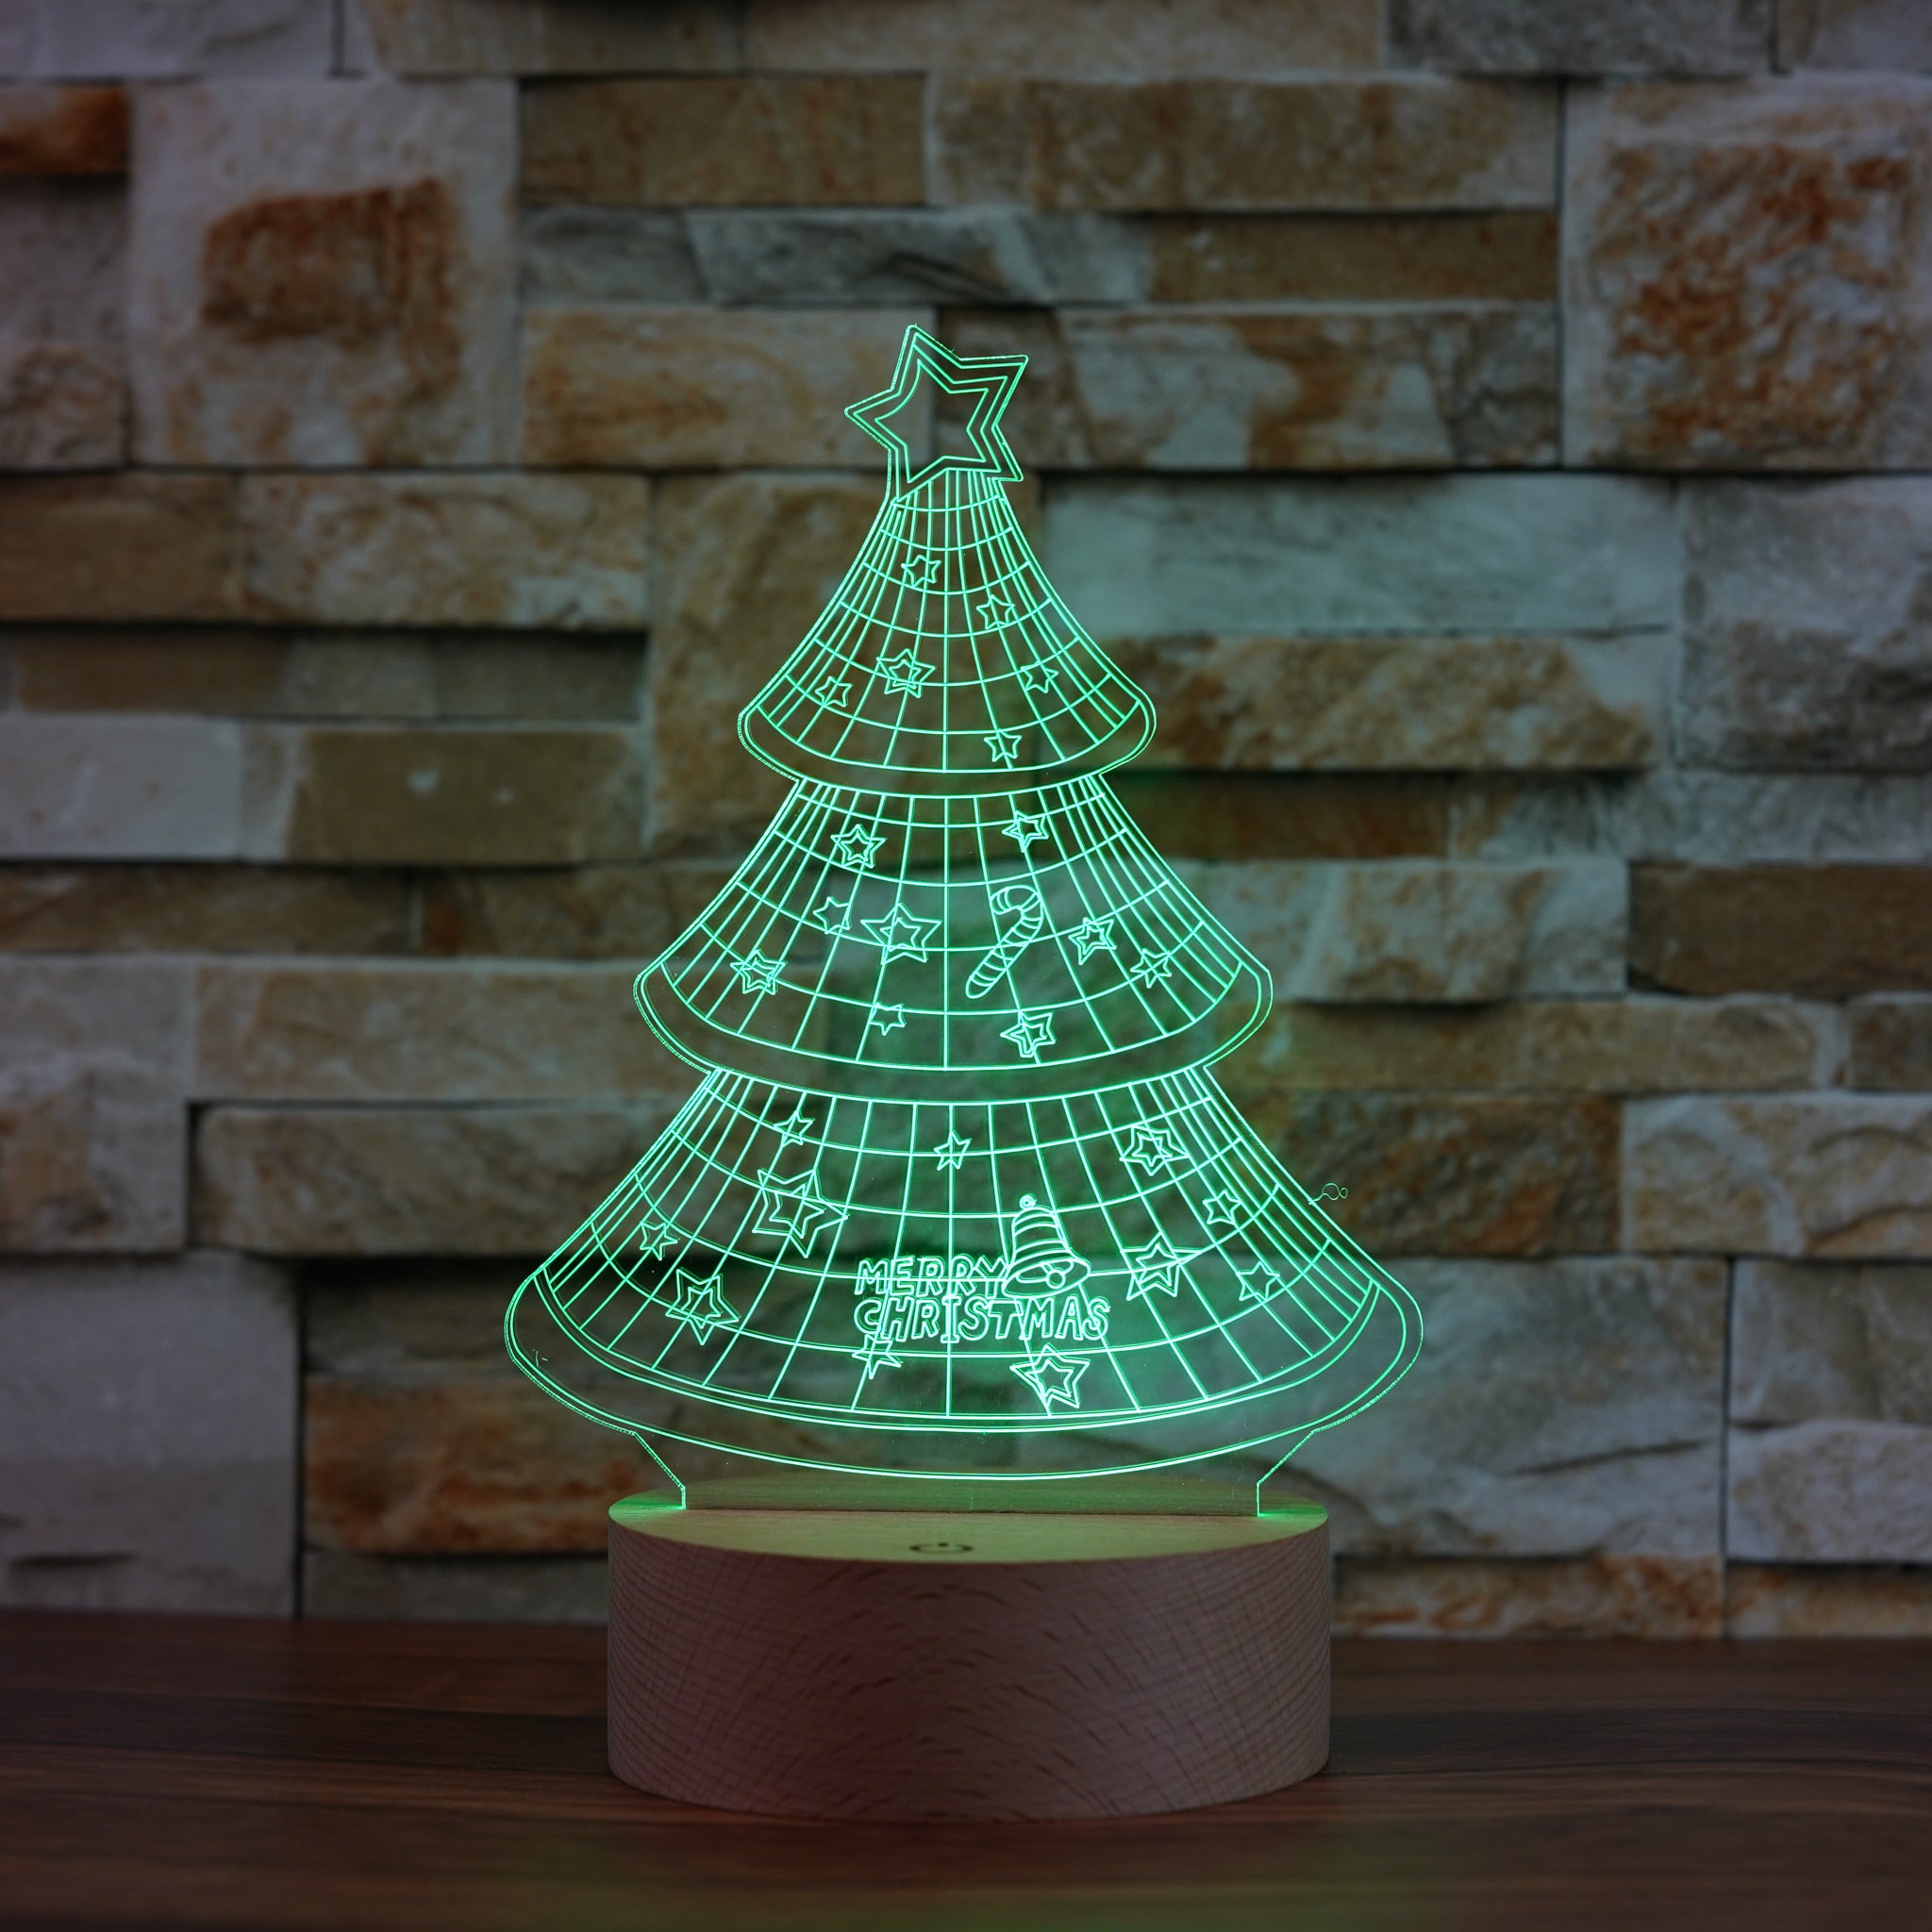 3D Hologram illusion Christmas Tree LED Night Light Lamp - QuirkyStore.in